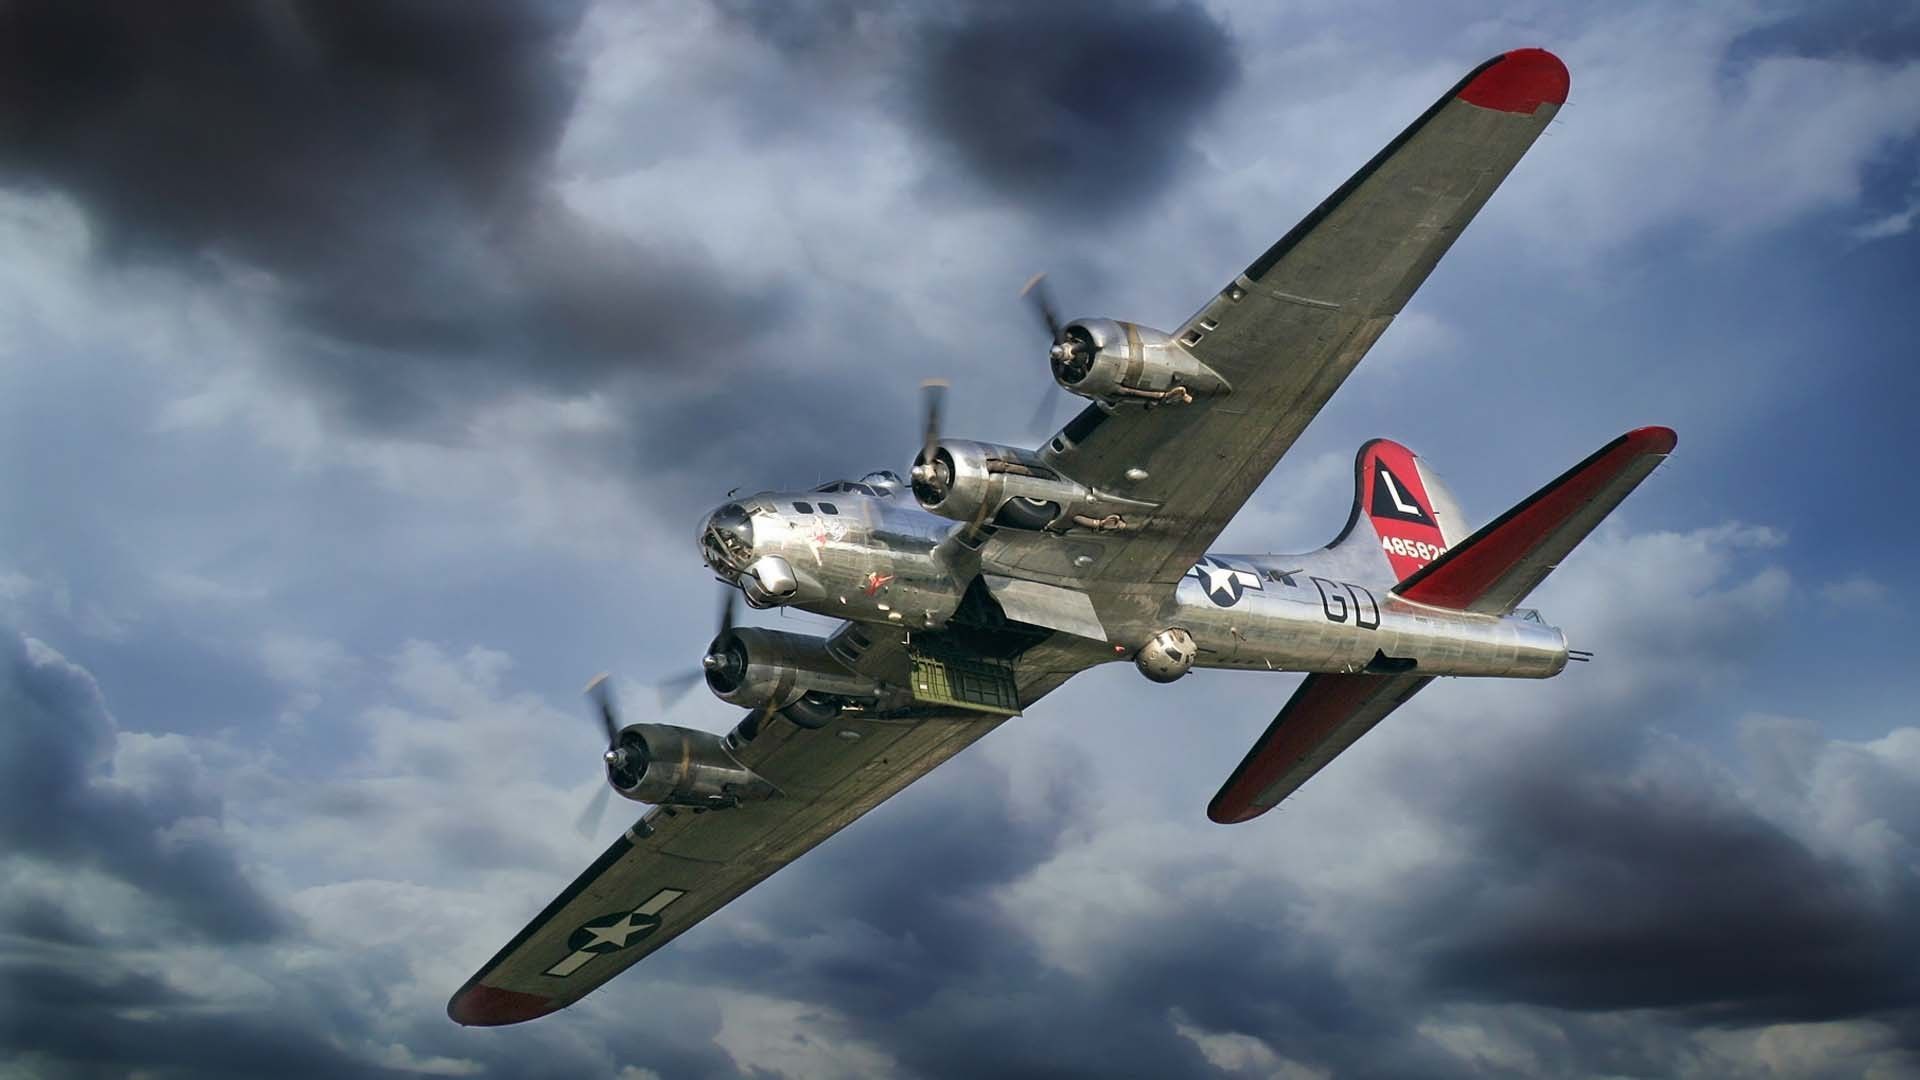 Boeing B 17 Flying Fortress Full HD Wallpaper And. Vintage Aircraft, Wwii Aircraft, Aircraft